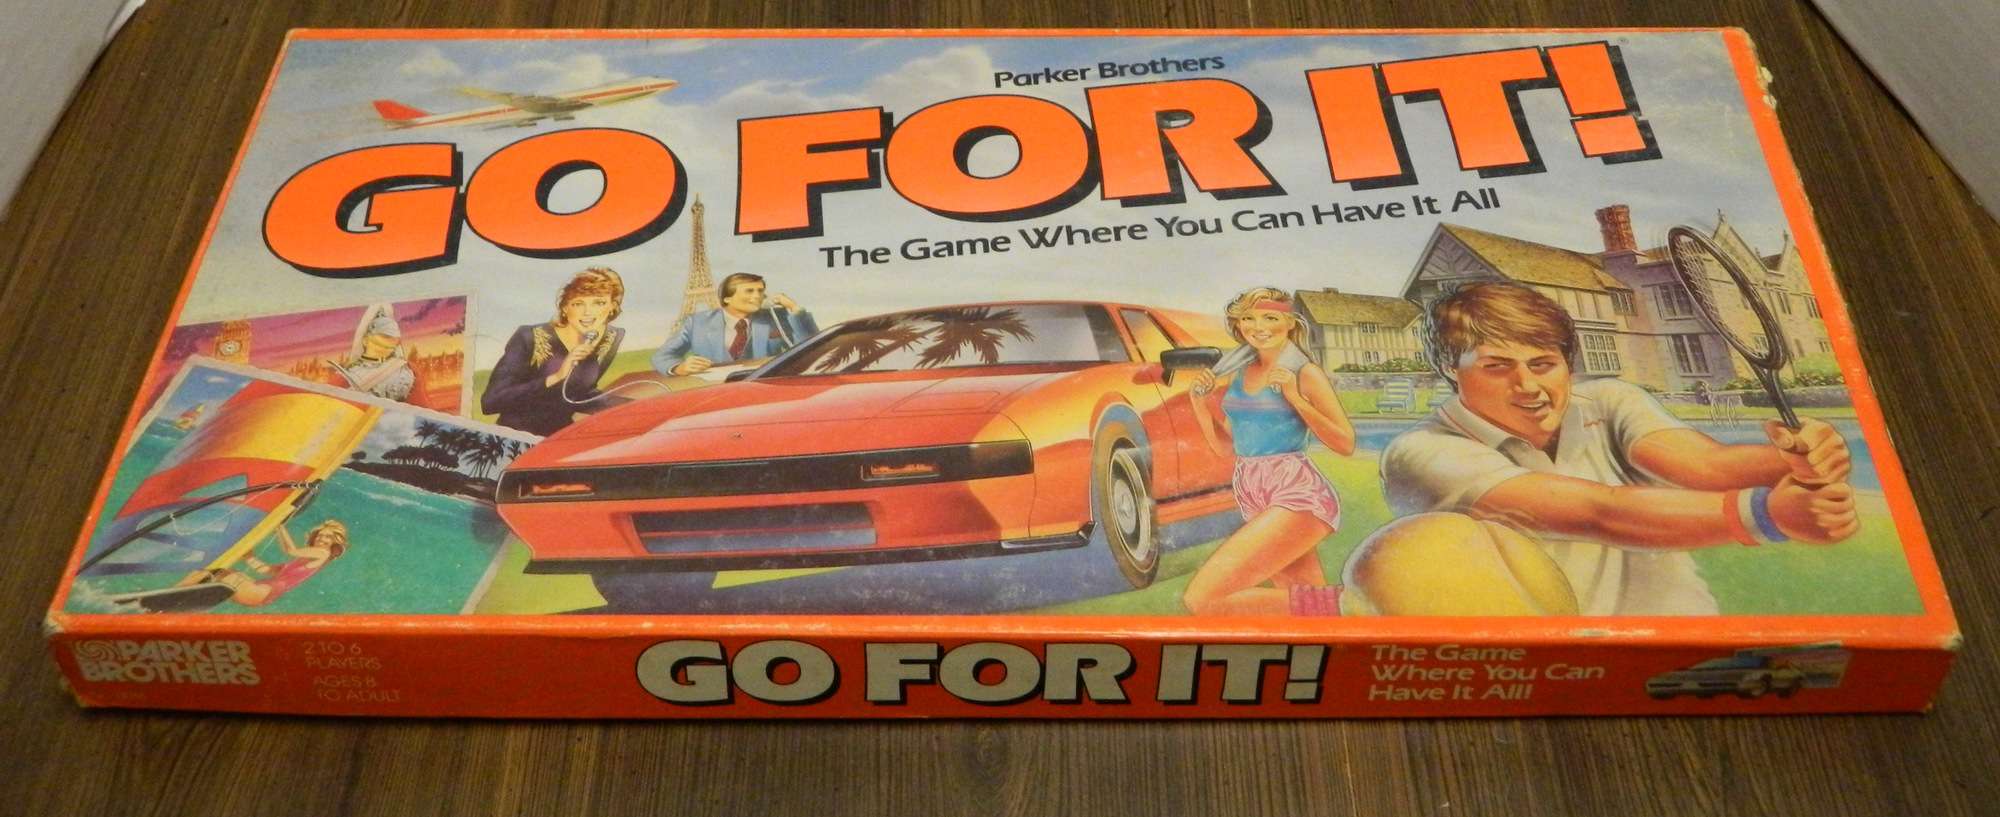 Go For It! (1986) Board Game Review and Instructions